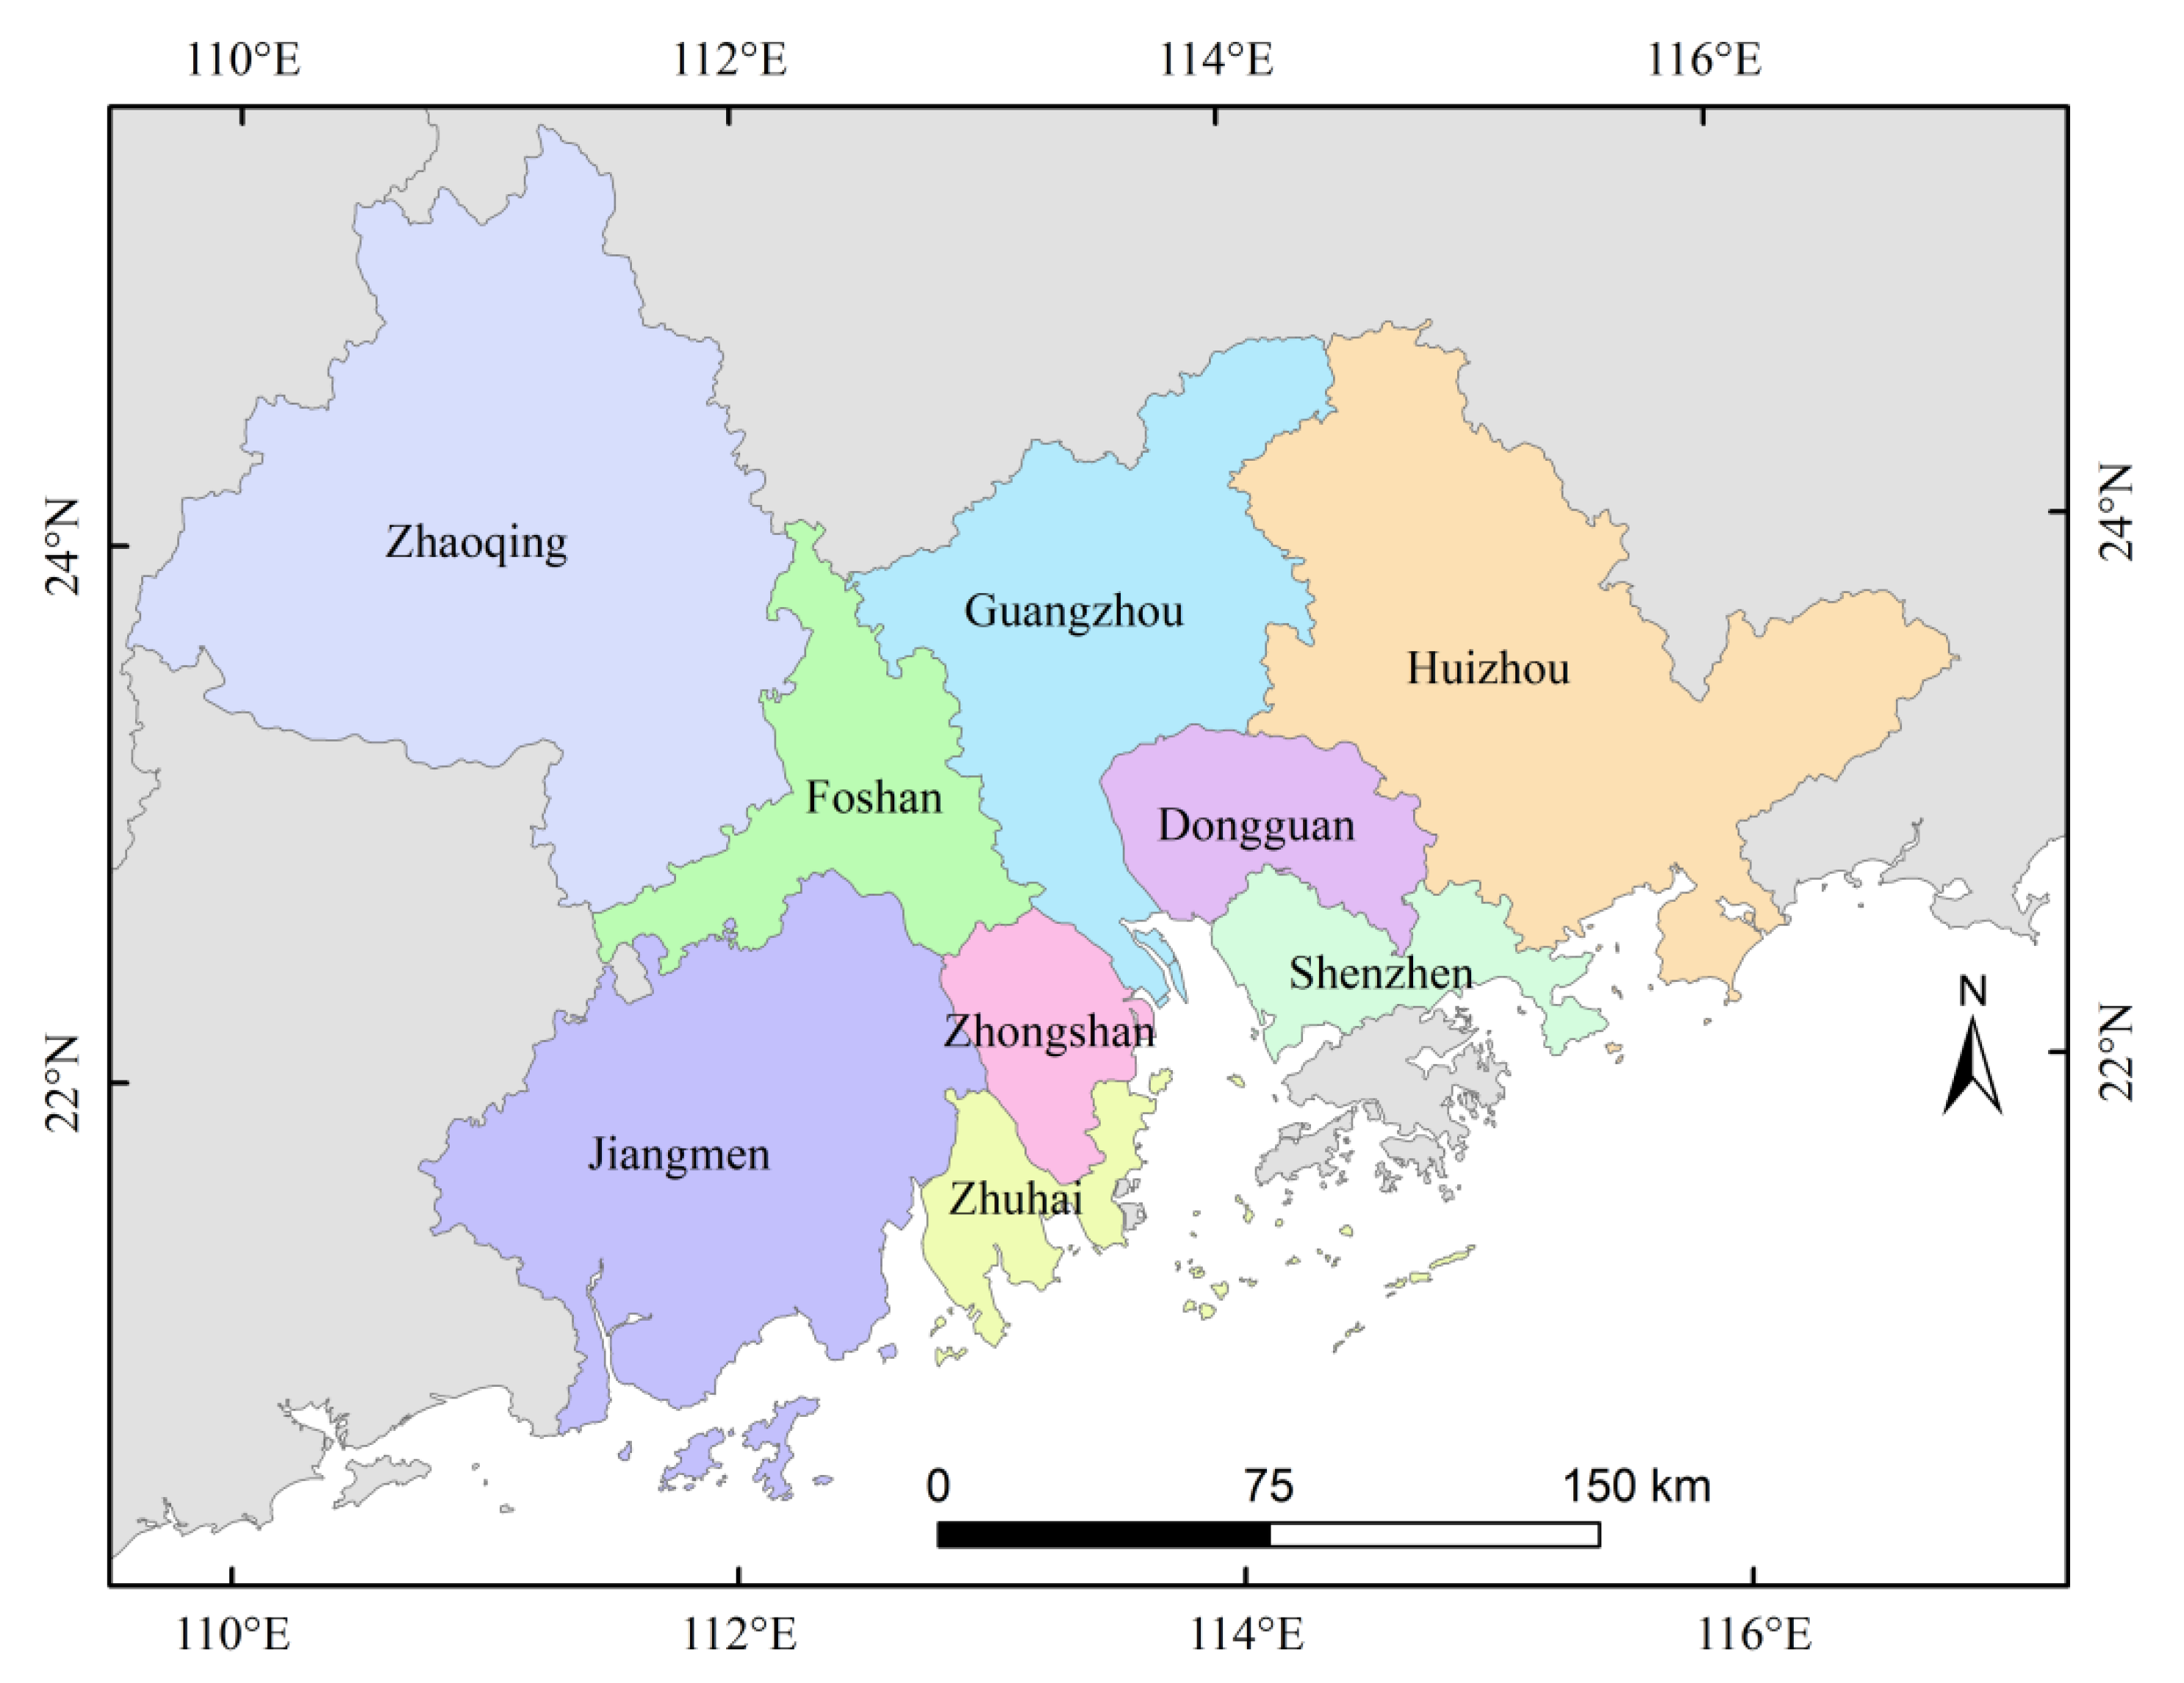 Remote Sensing | Free Full-Text | Estimation and Analysis of the Nighttime  PM2.5 Concentration Based on LJ1-01 Images: A Case Study in the Pearl River  Delta Urban Agglomeration of China